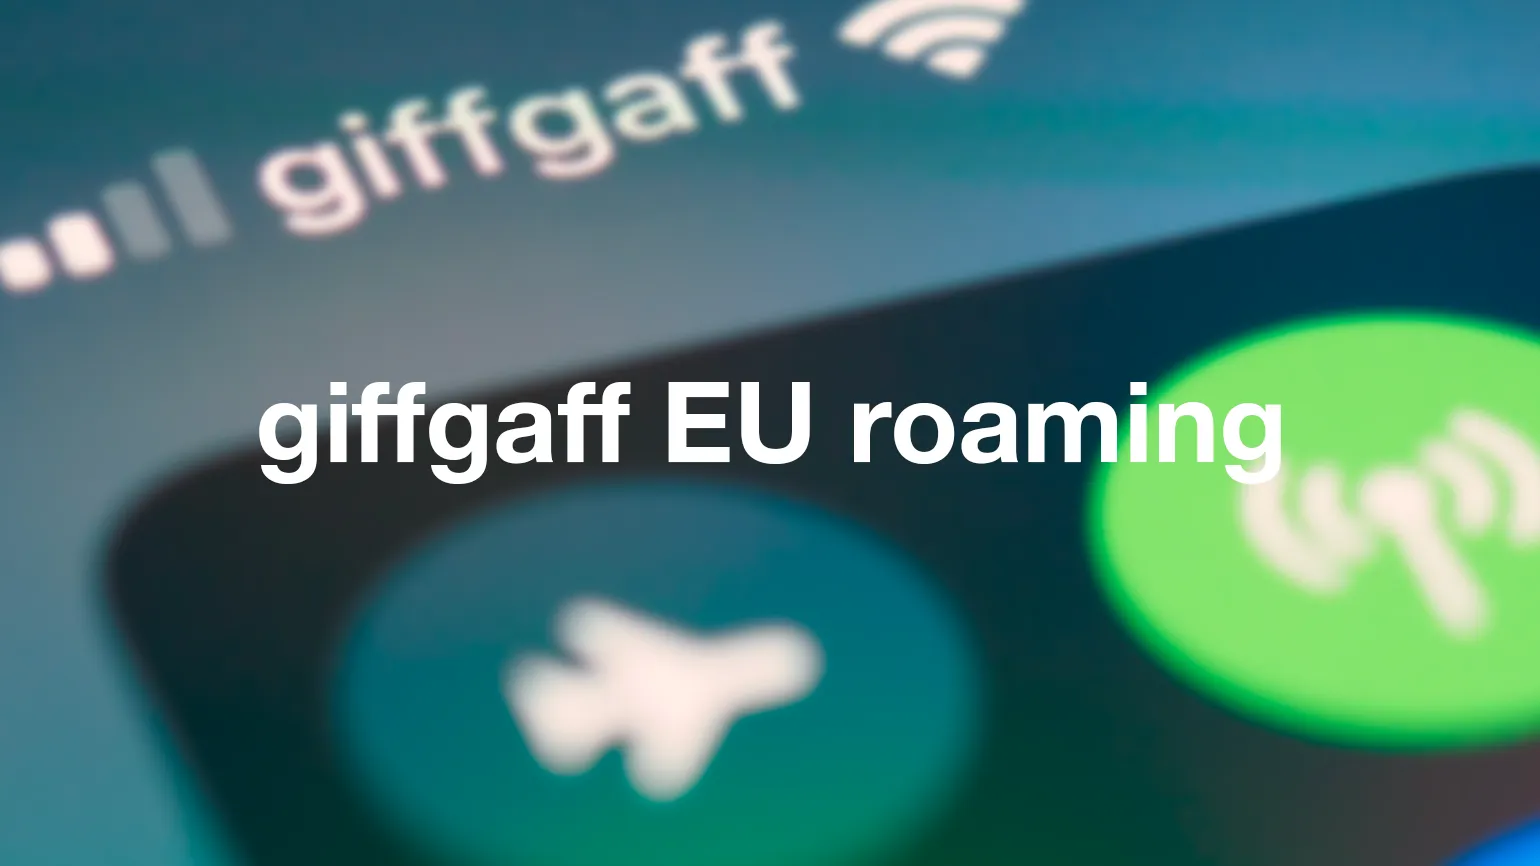 giffgaff EU roaming - after Brexit